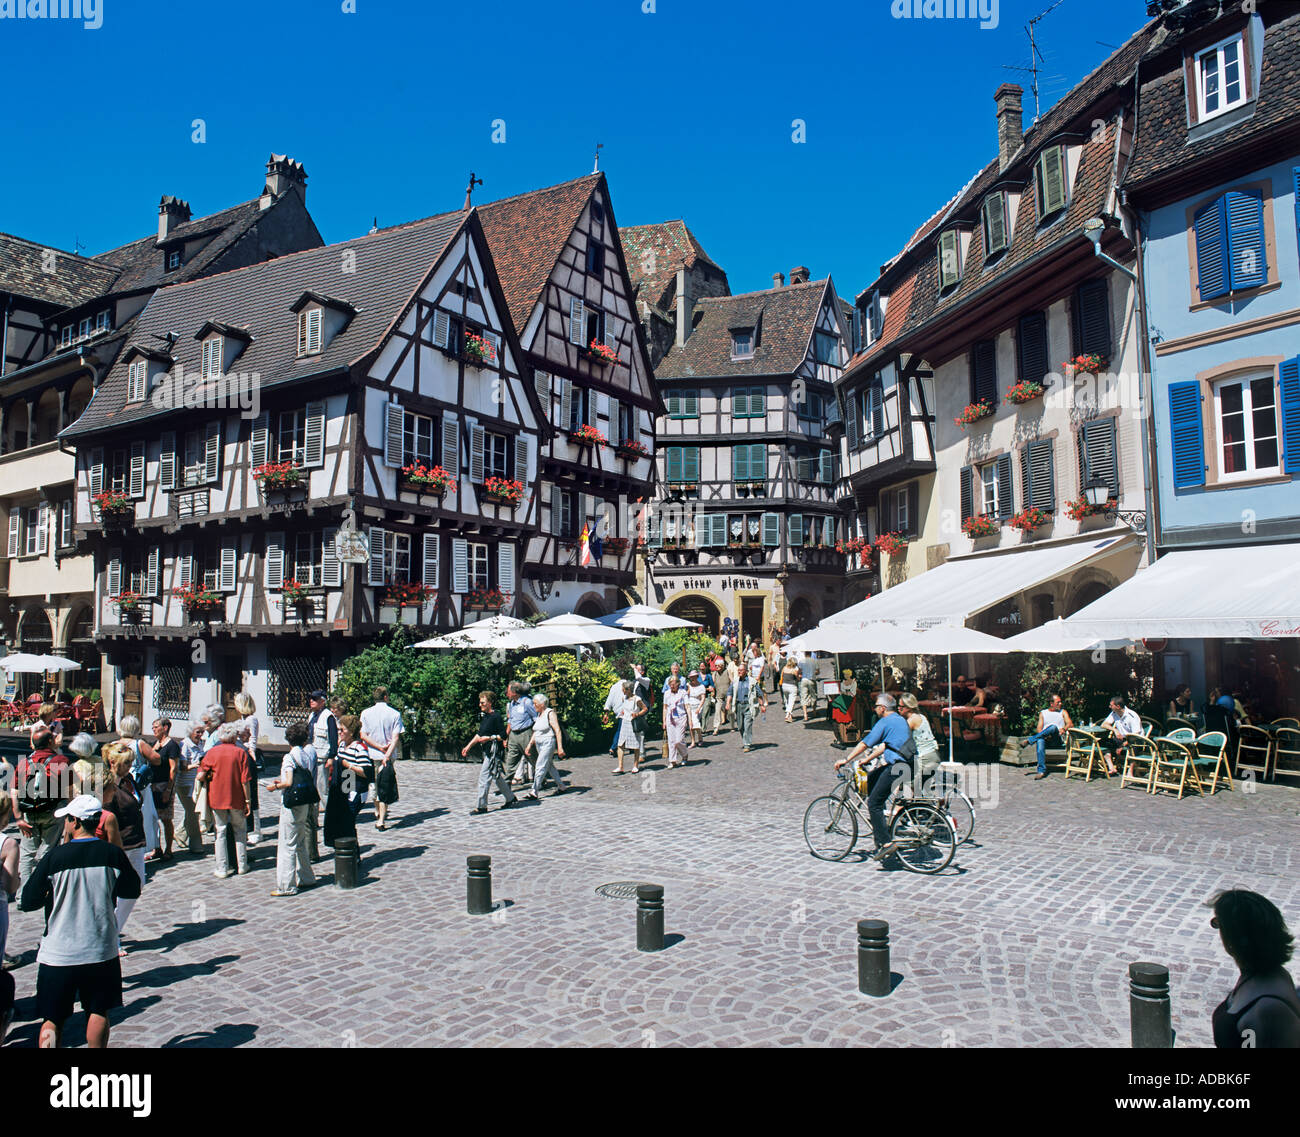 Old timber framed buildings in the town centre of Colmar, France. Stock Photo